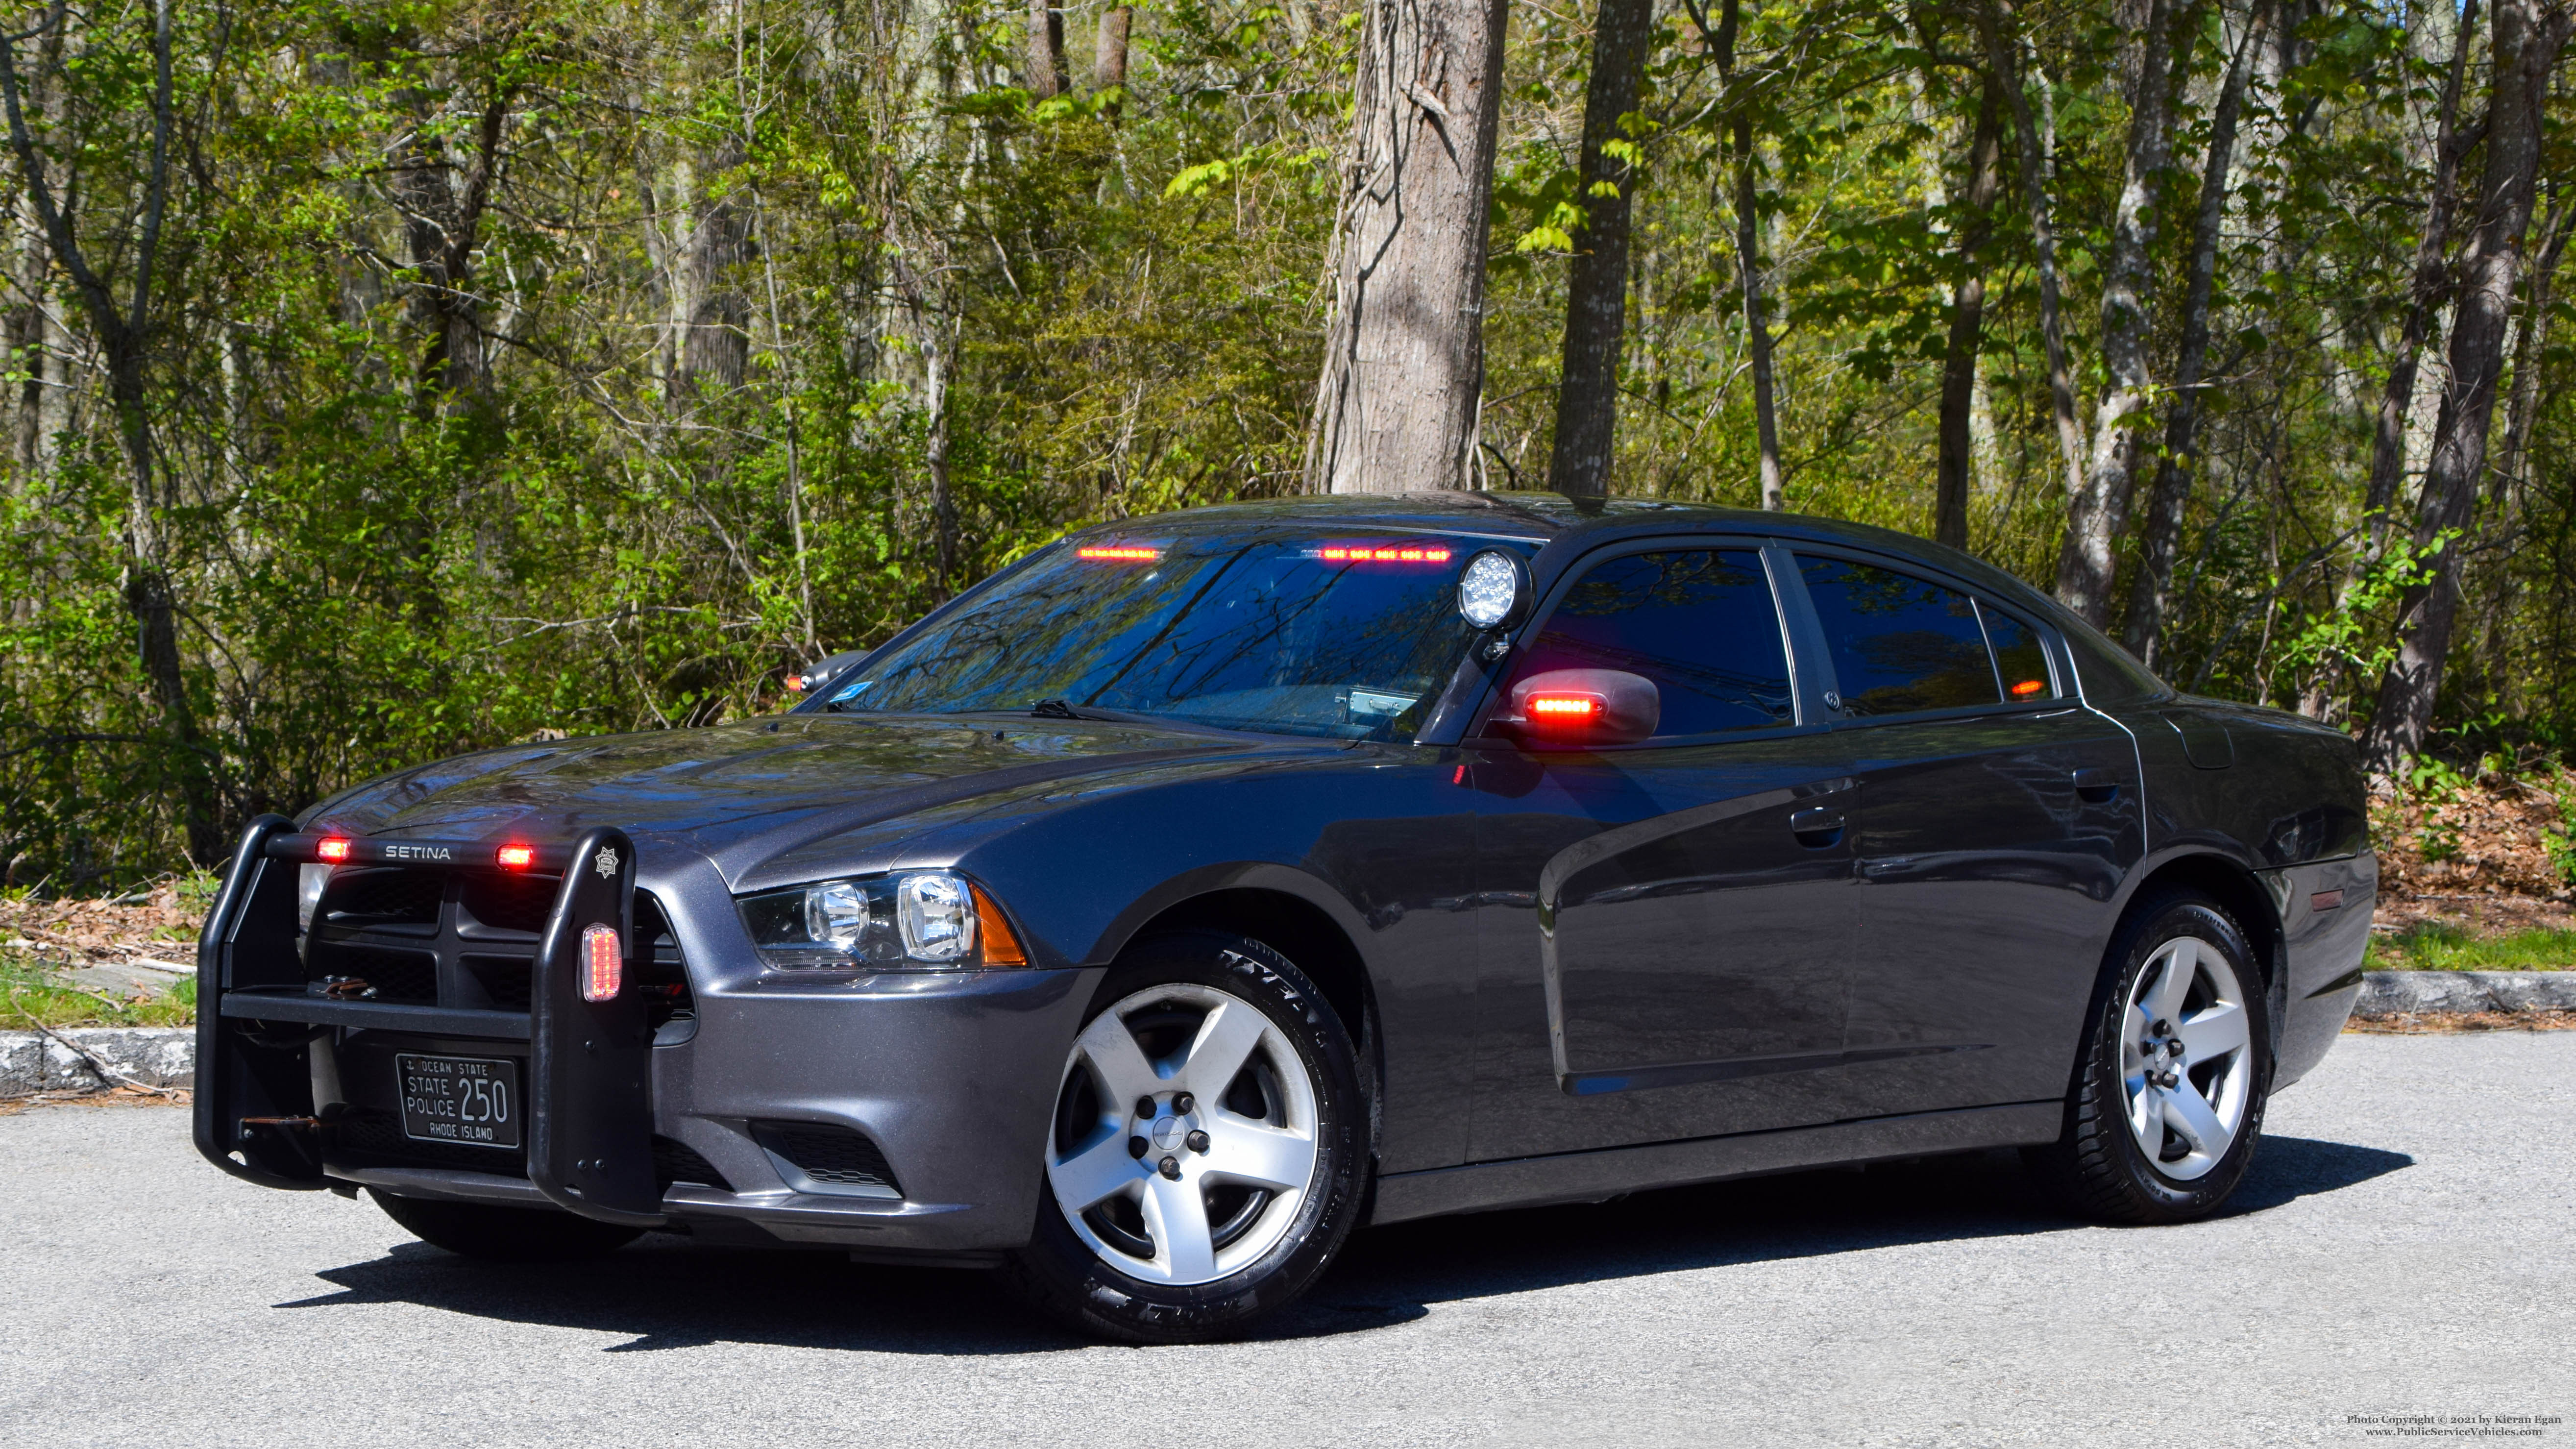 A photo  of Rhode Island State Police
            Cruiser 250, a 2013 Dodge Charger             taken by Kieran Egan